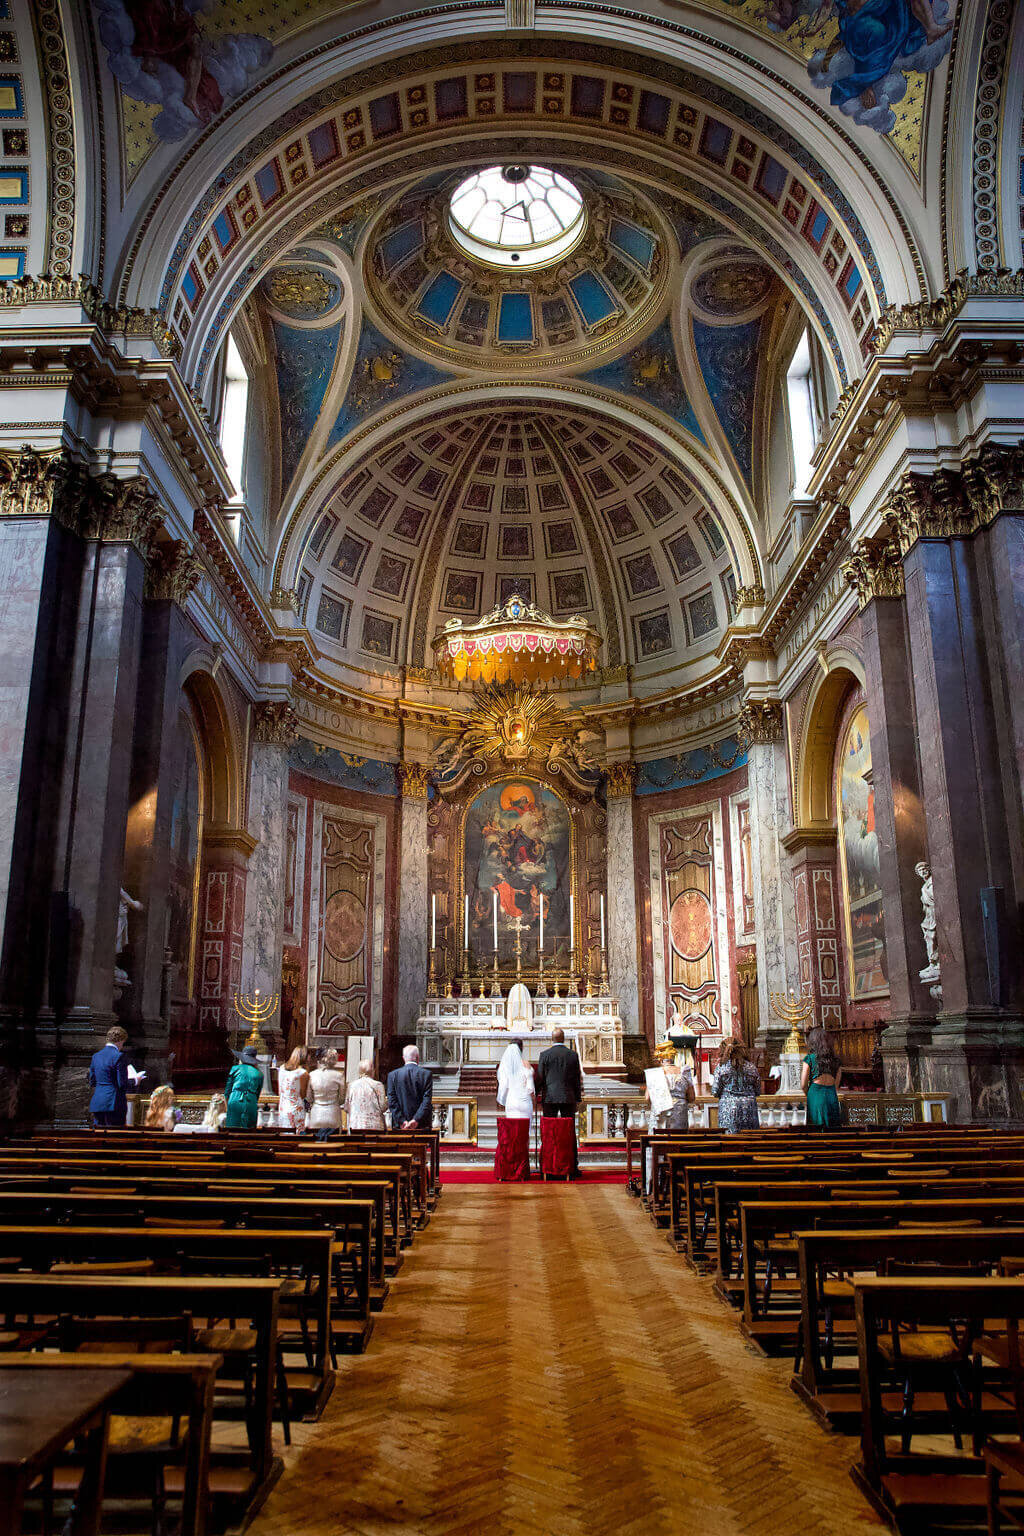 Inside the oratory during a wedding ceremony